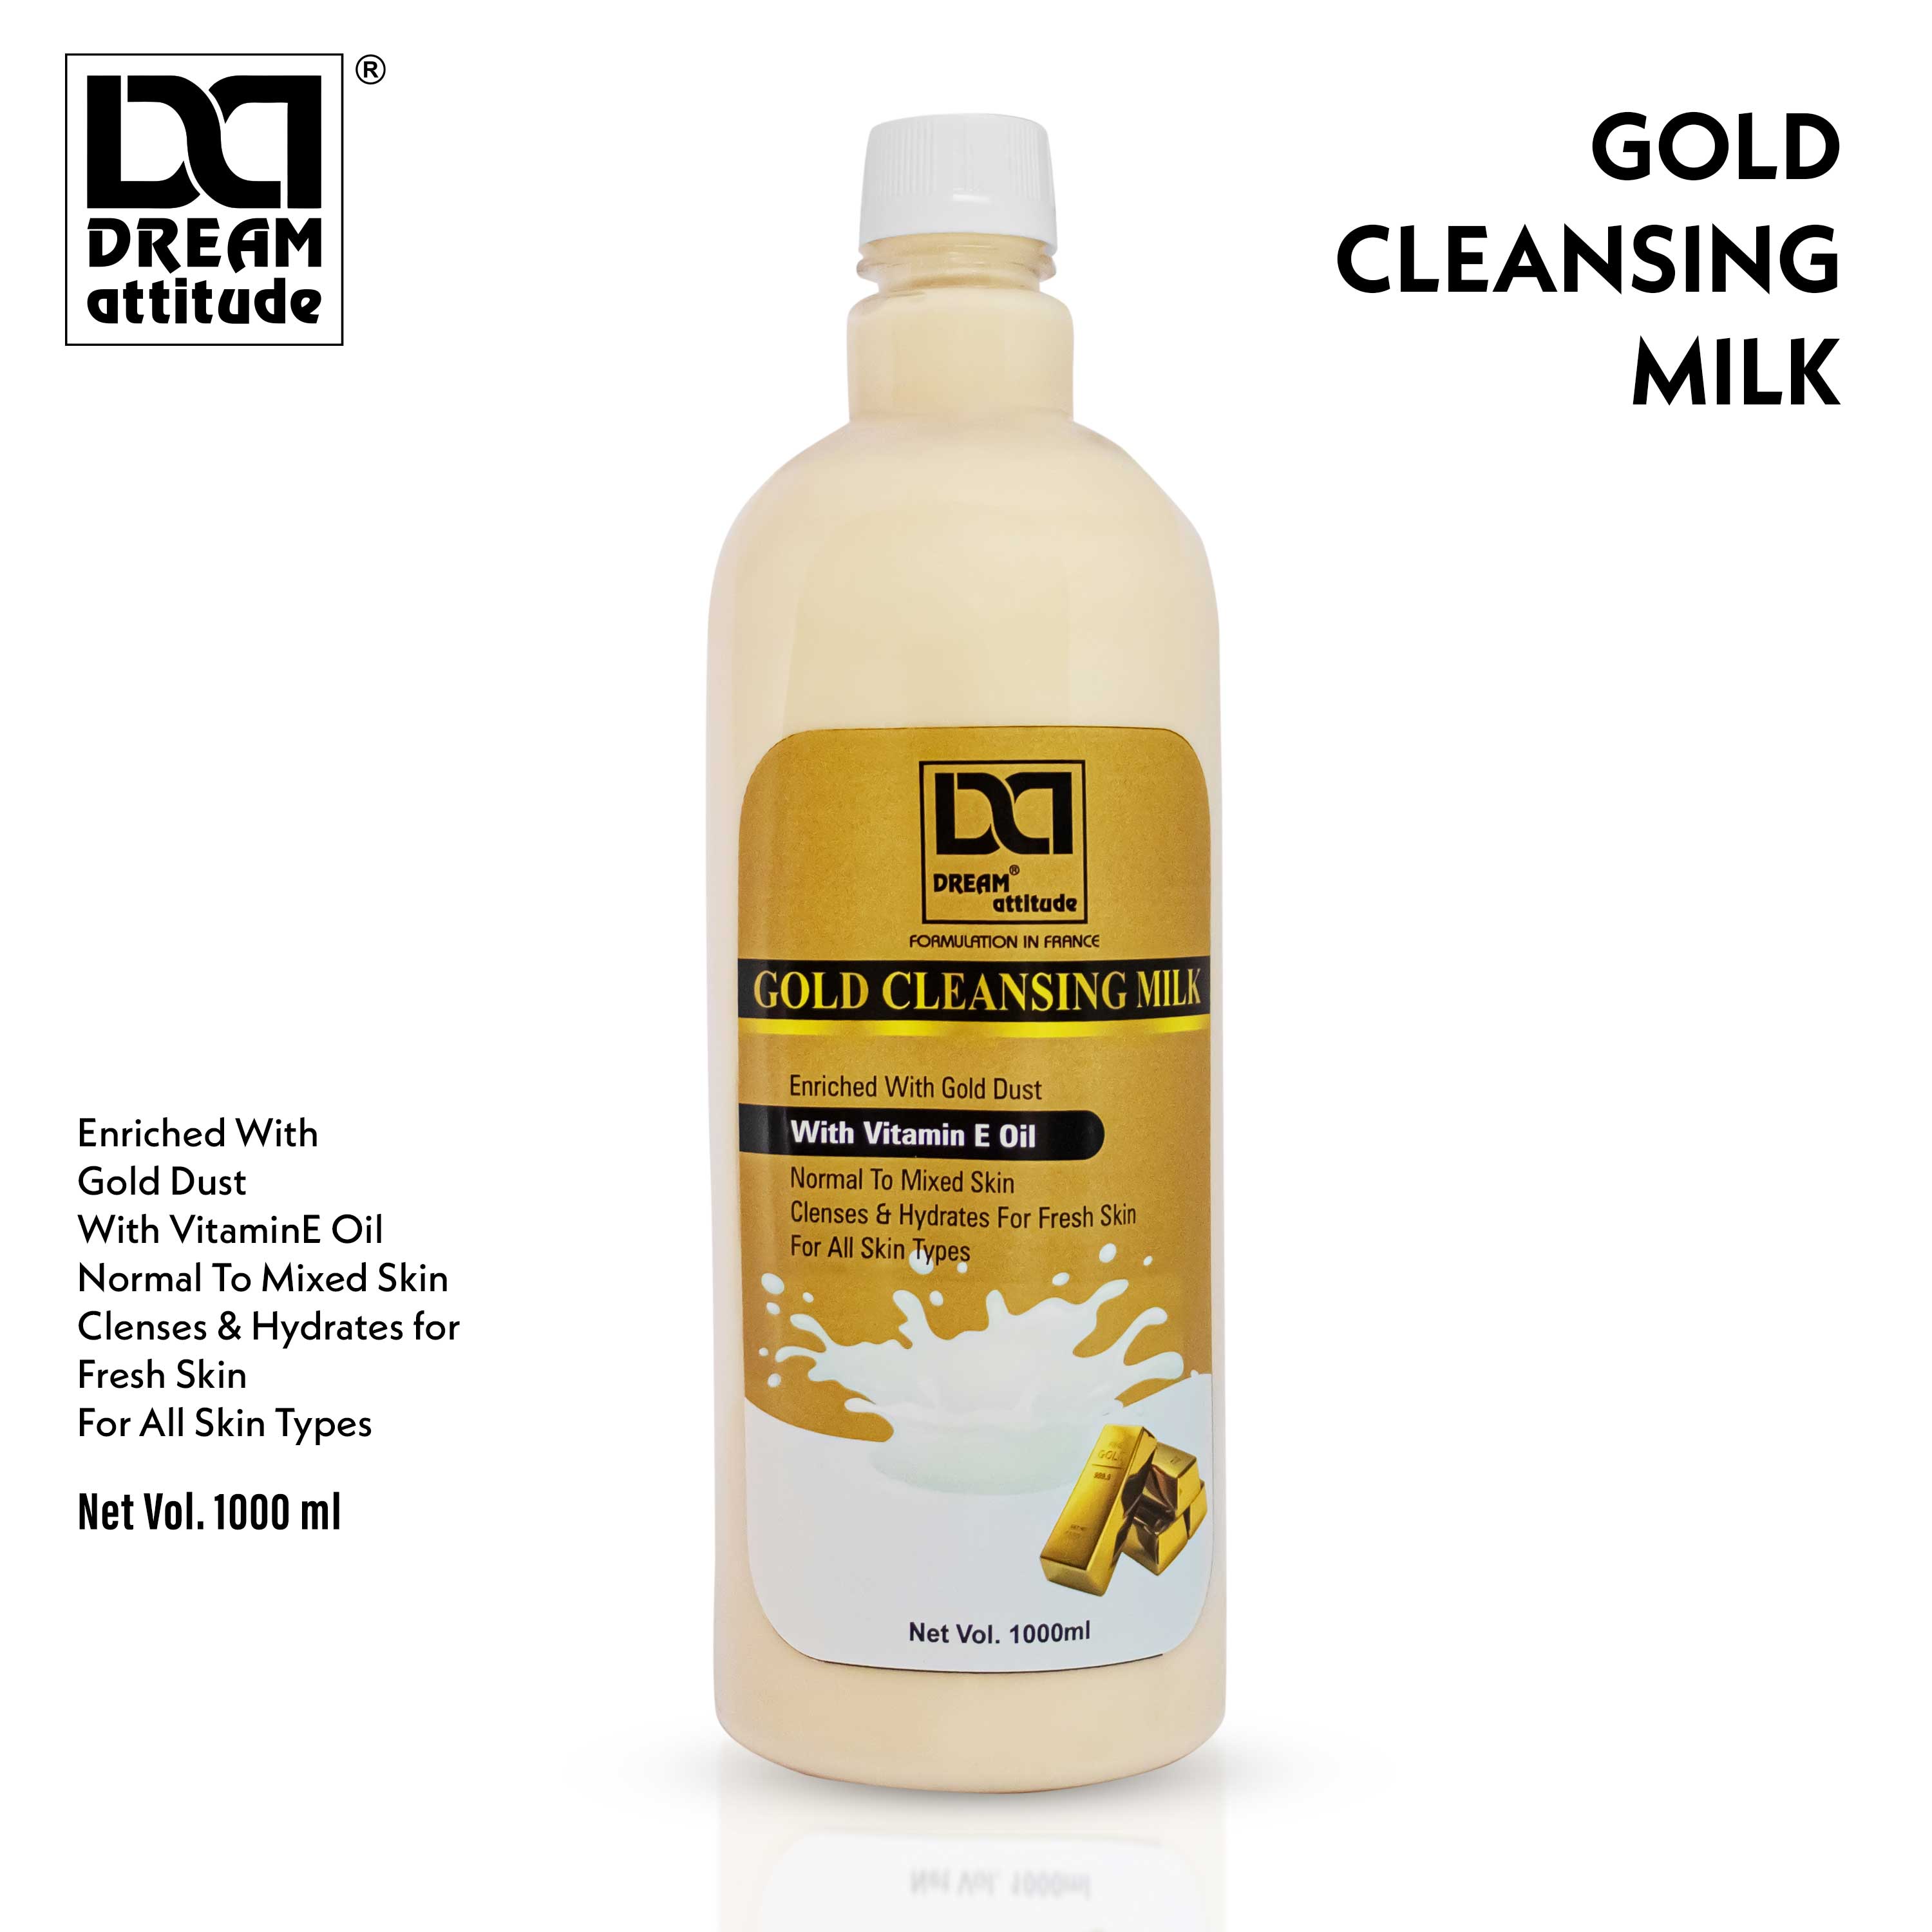 GOLD CLEANSING MILK 